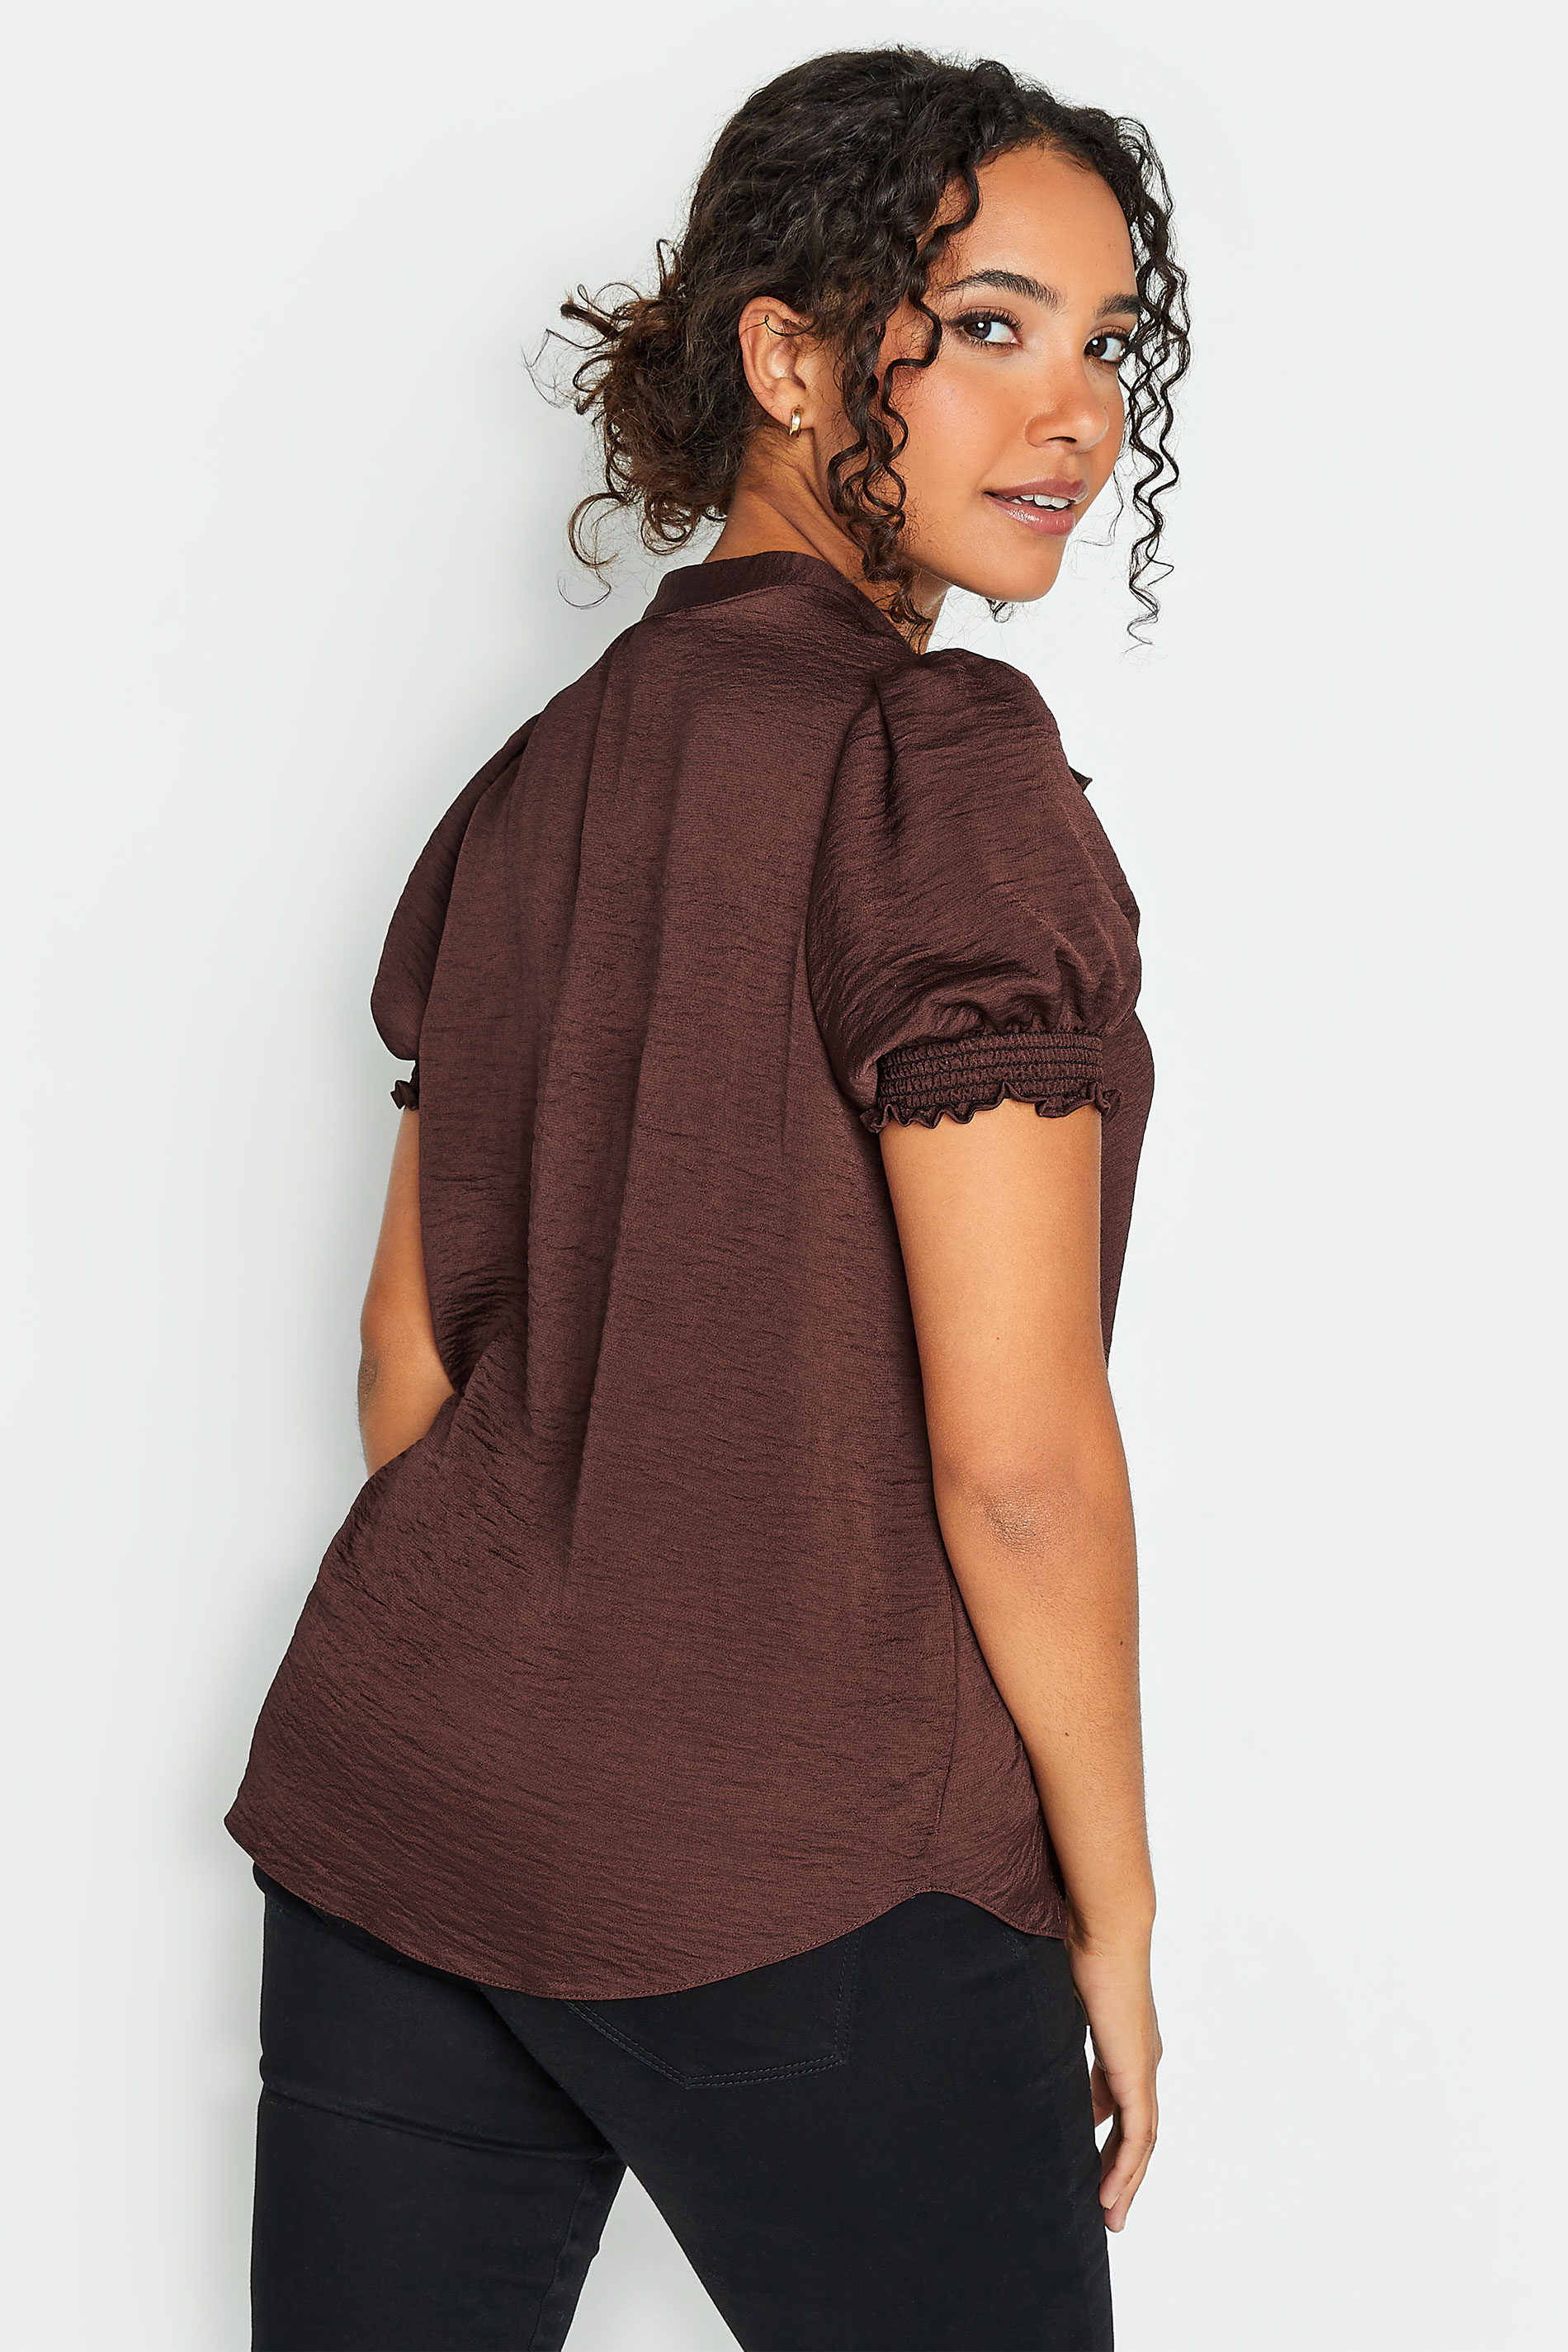 M&Co Brown Frill Satin Blouse | M&Co 3